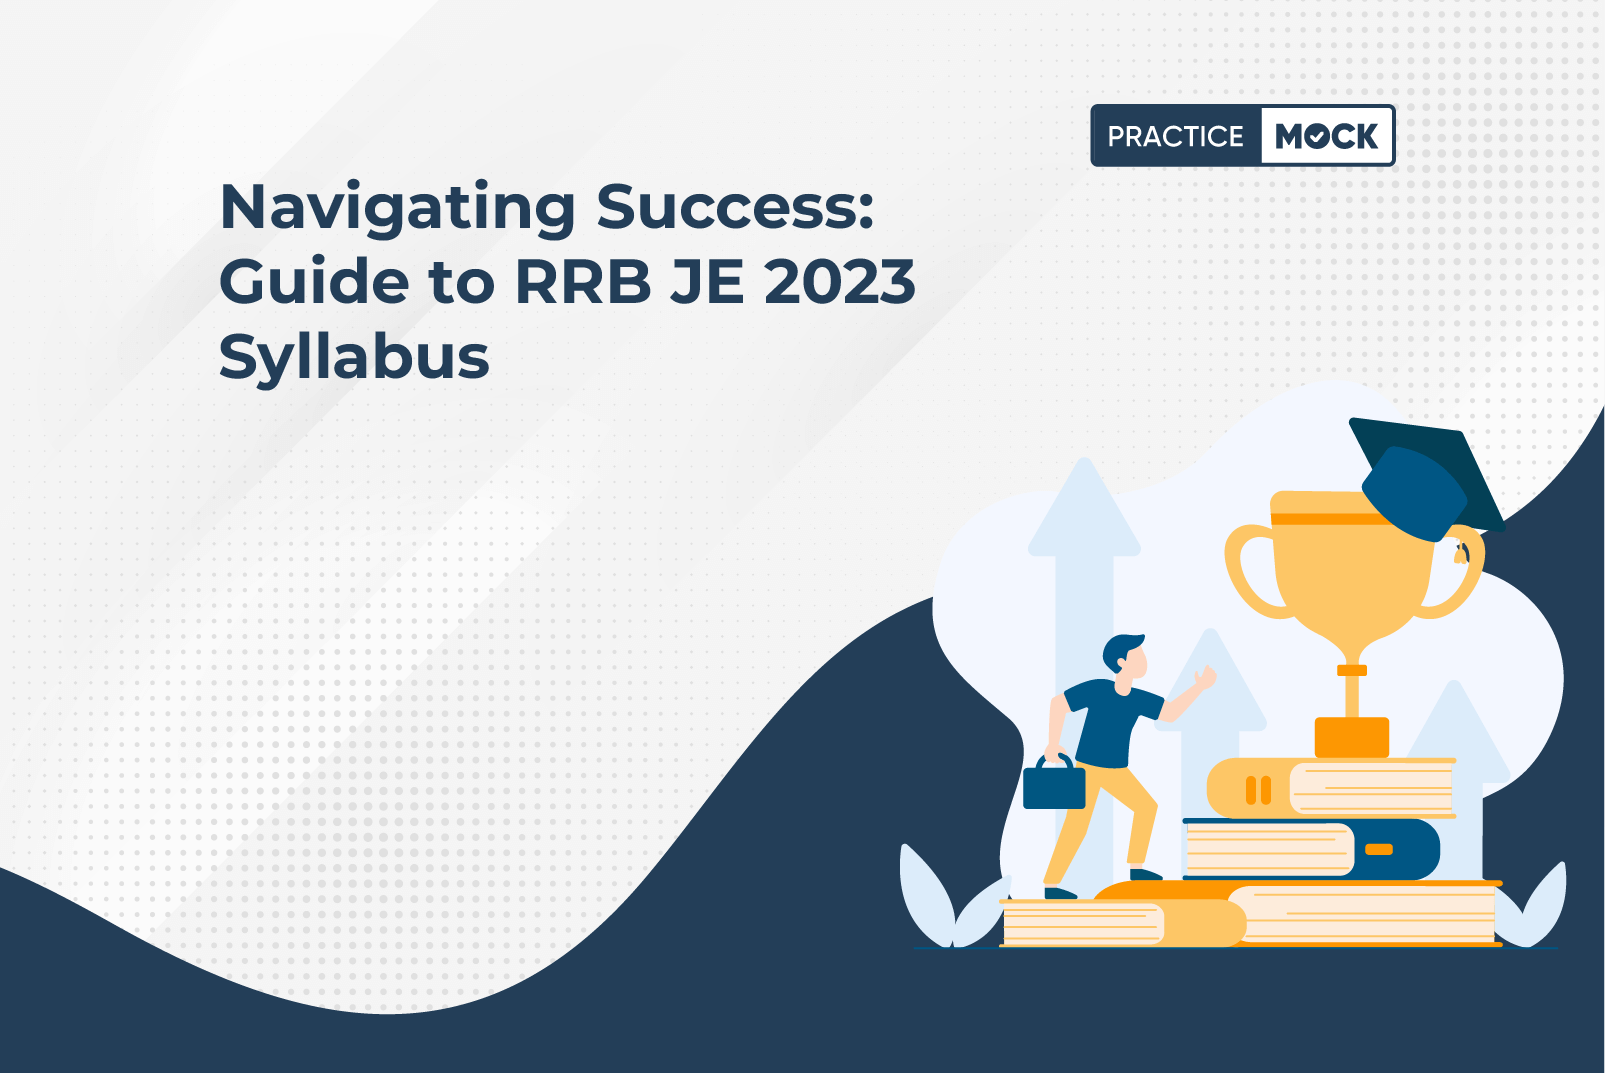 Navigating Success: Guide to RRB JE 2023 Syllabus